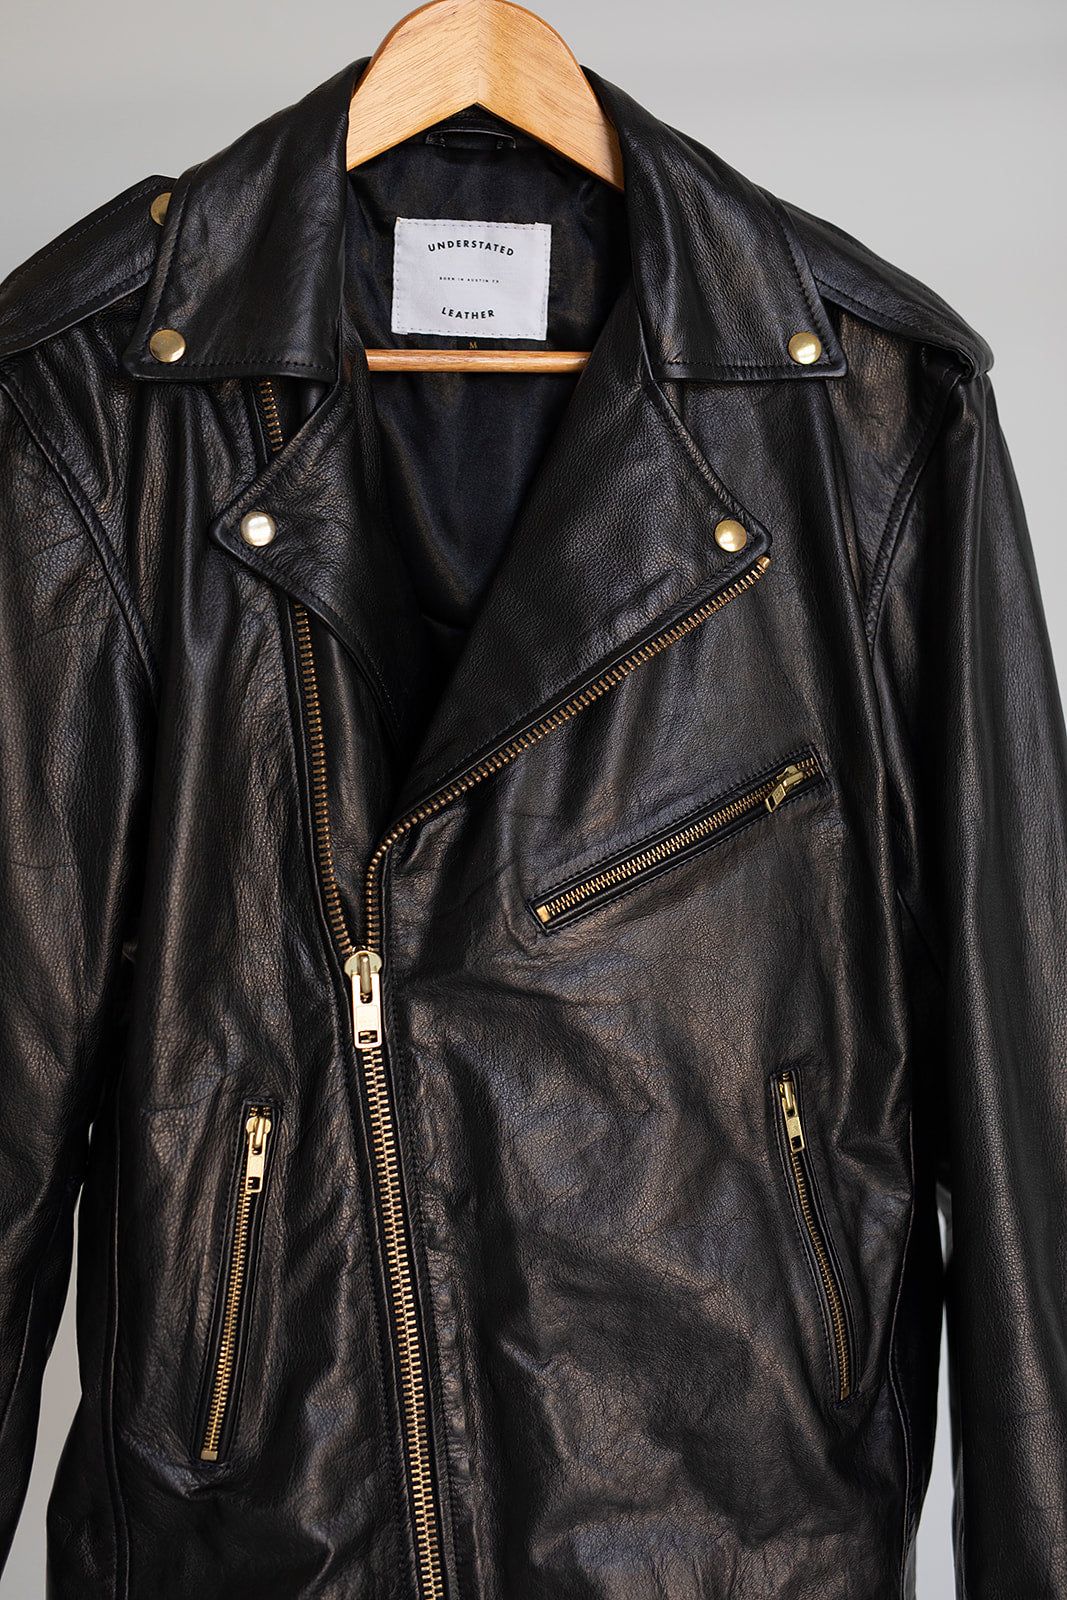 MENS ANTIQUE GOLD EASY RIDER — Understated Leather